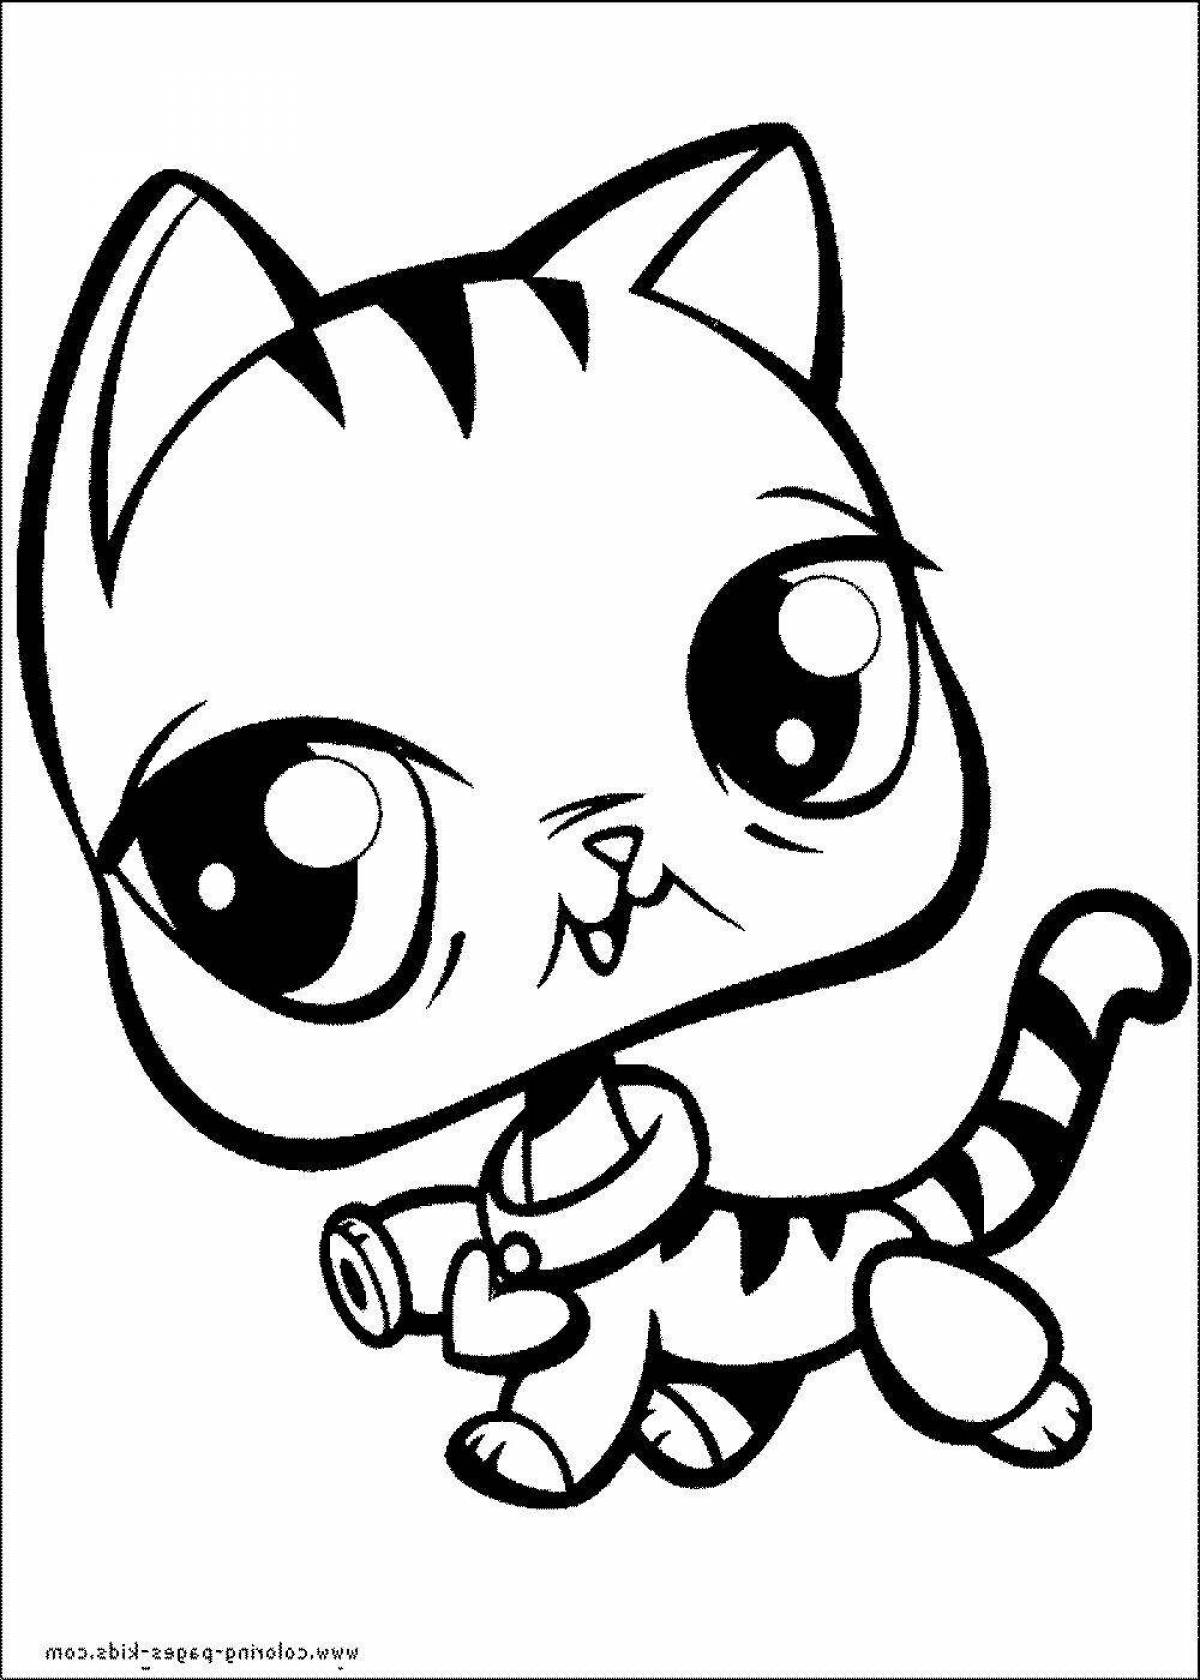 Quirky little cute kittens coloring book